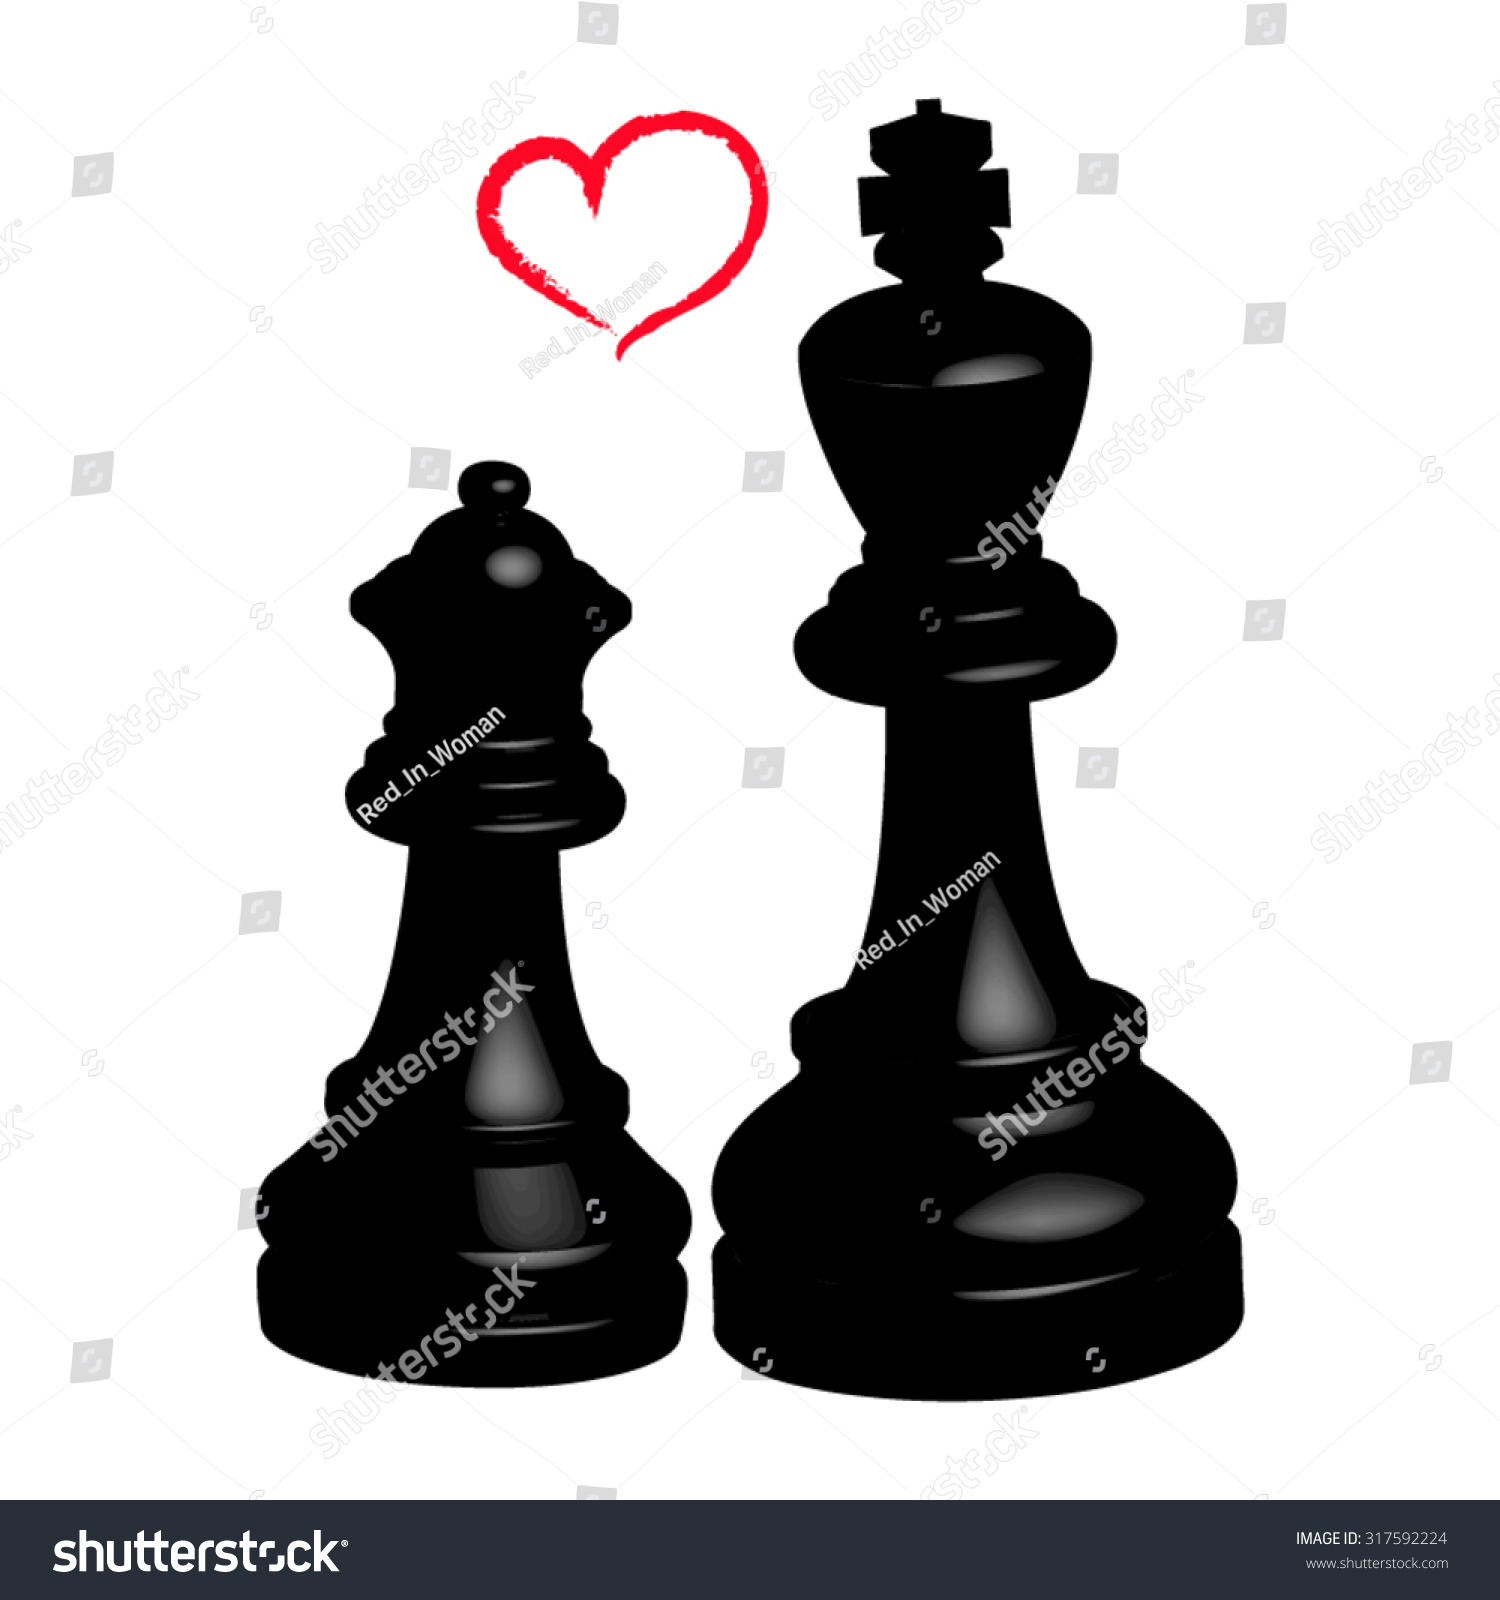 SVG of The love between the black Queen and the black king, happy business relationship. In 3D, all isolated. svg